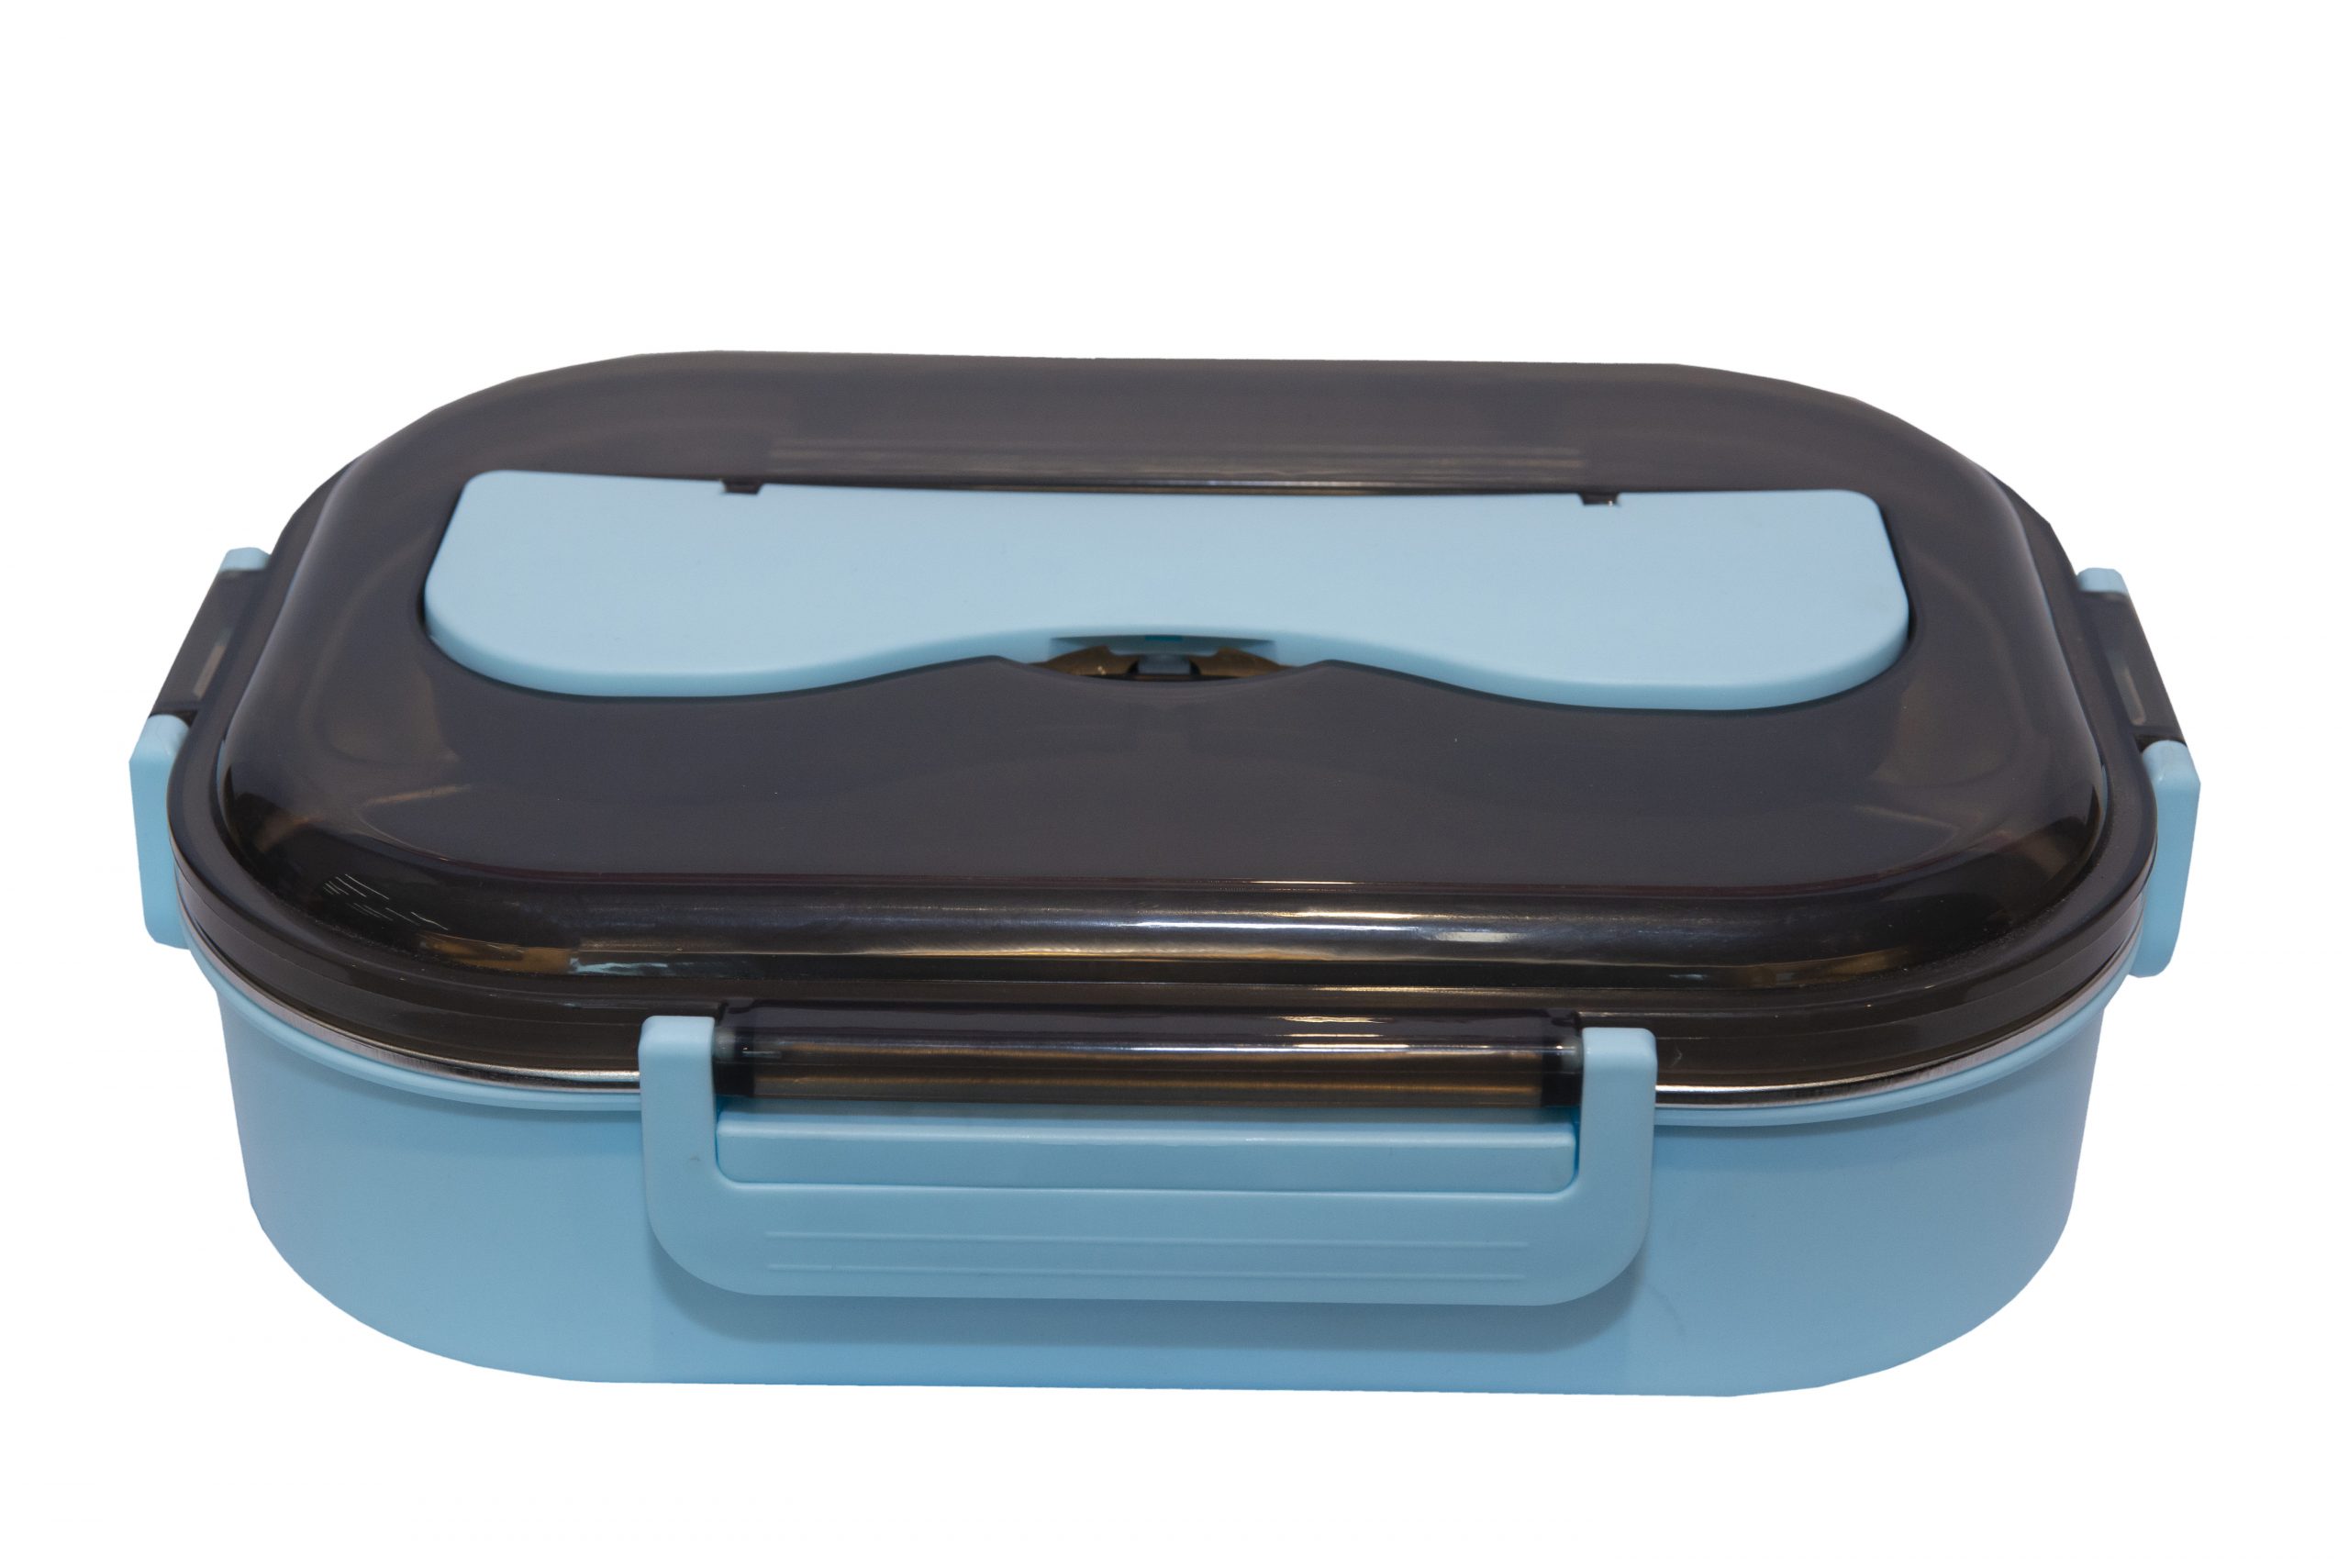 Stainless Steel Lunch Box Printing Singapore_CE5018_Powder Blue